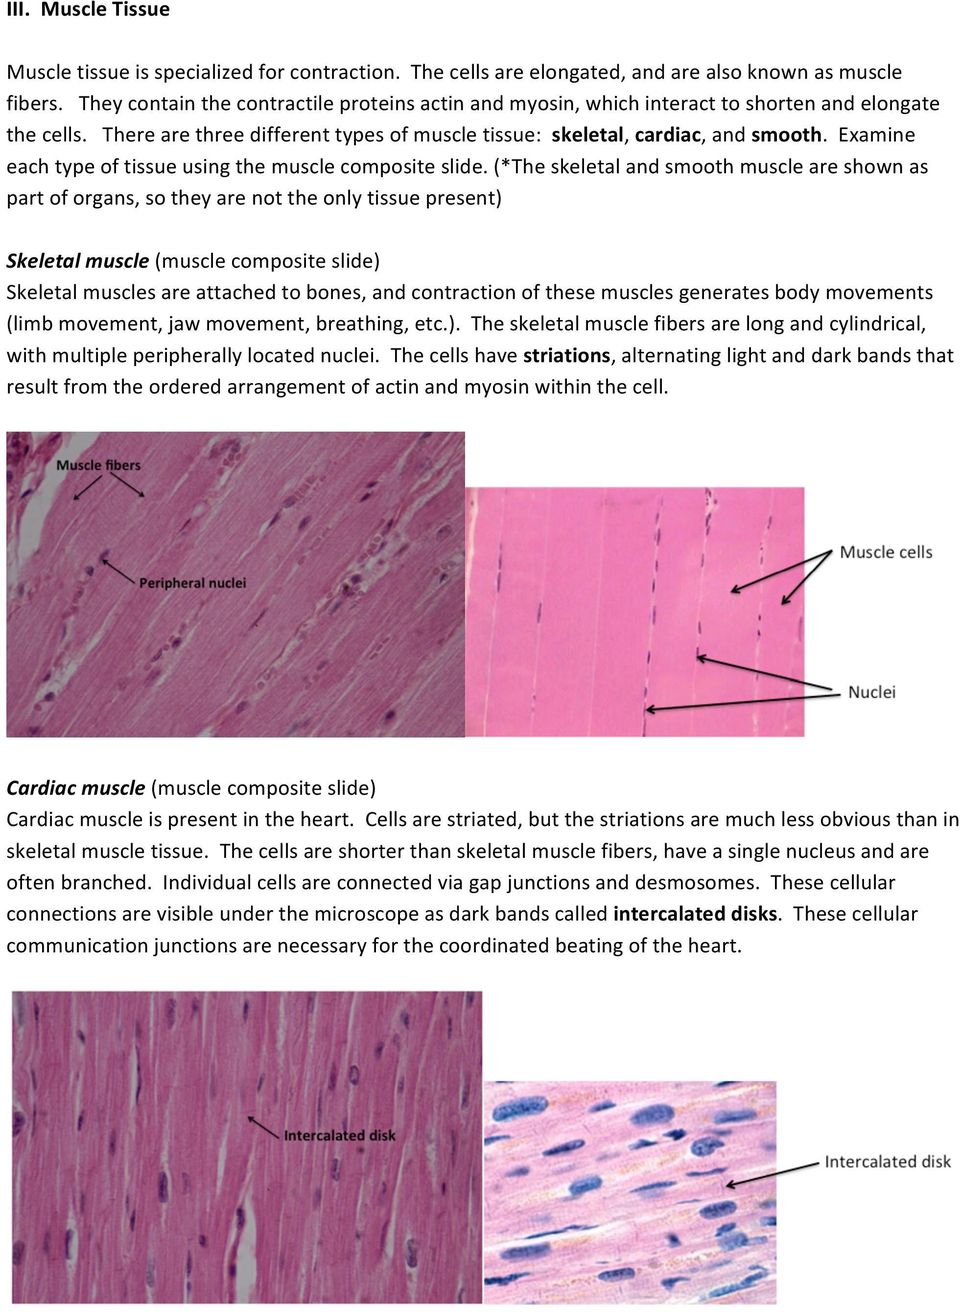 Examine each type of tissue using the muscle composite slide.